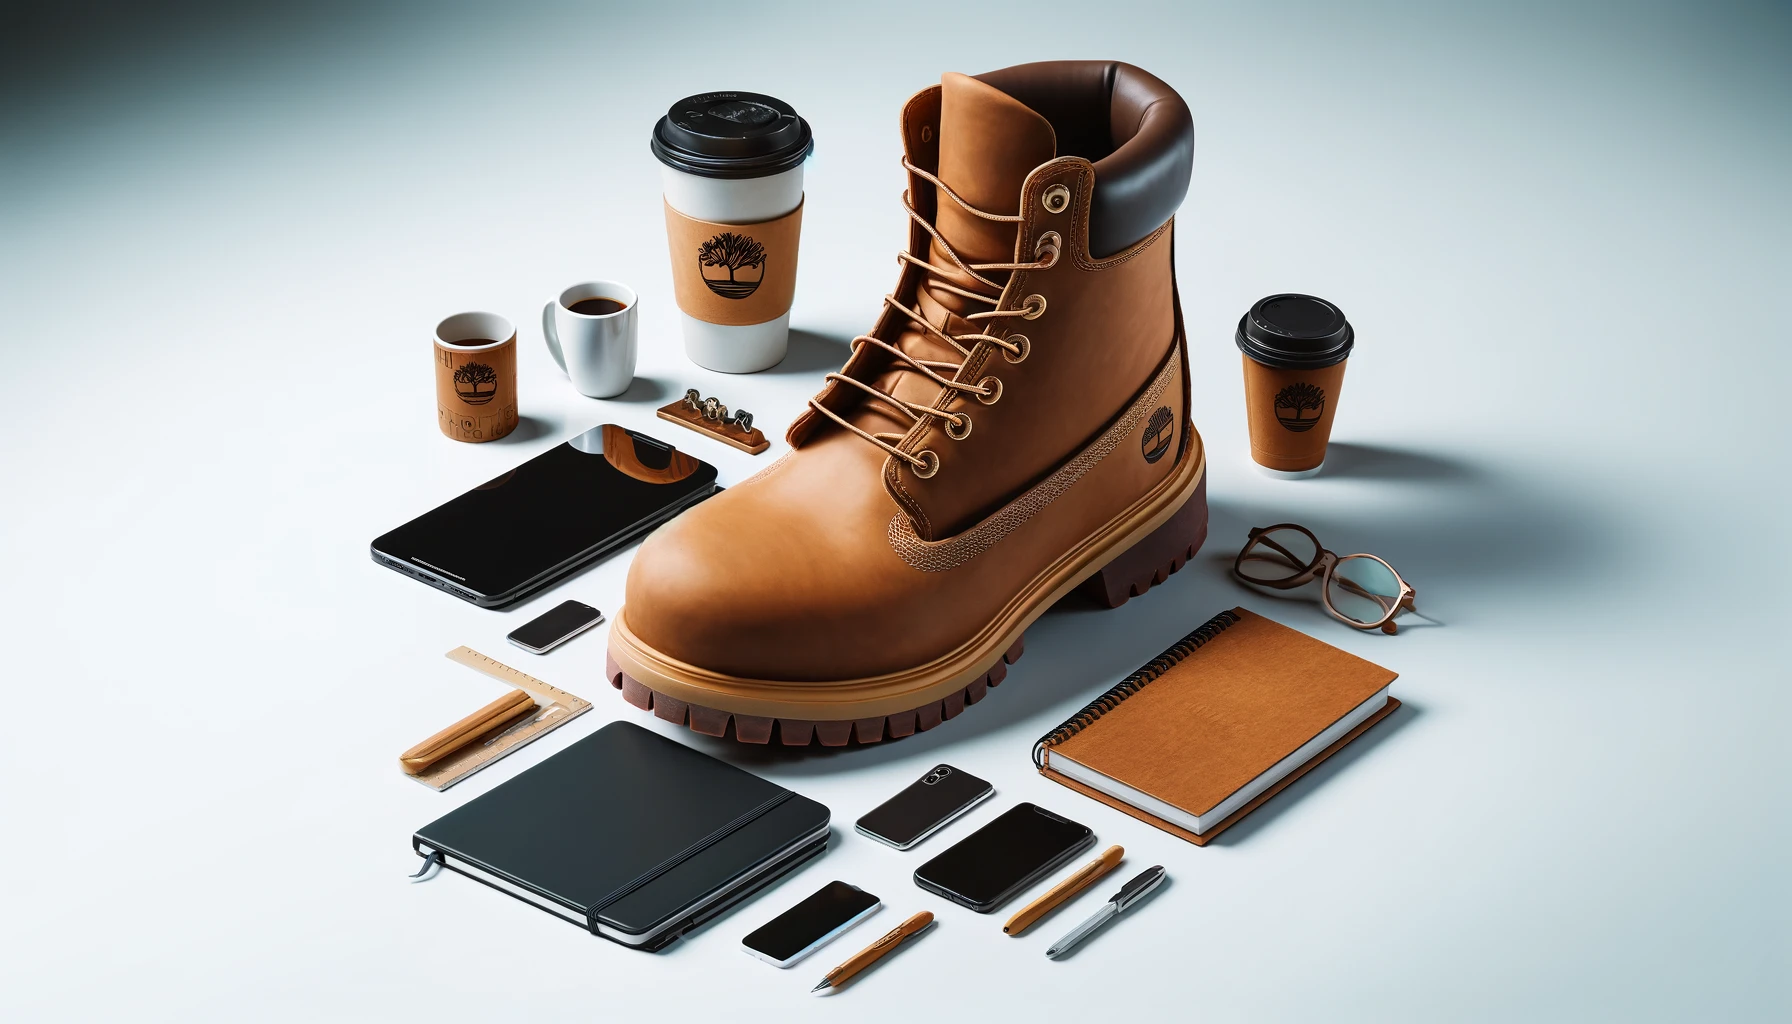 An image that illustrates the size of Timberland boots in a clear and detailed manner. The scene includes a pair of Timberland boots placed next to common objects for scale, such as a coffee cup, a notebook, or a smartphone, to give a sense of their actual size. The boots are highlighted in the composition, showing their iconic design and sturdy build. The background is simple and unobtrusive, ensuring that the focus remains on the boots and the objects used for scale comparison.